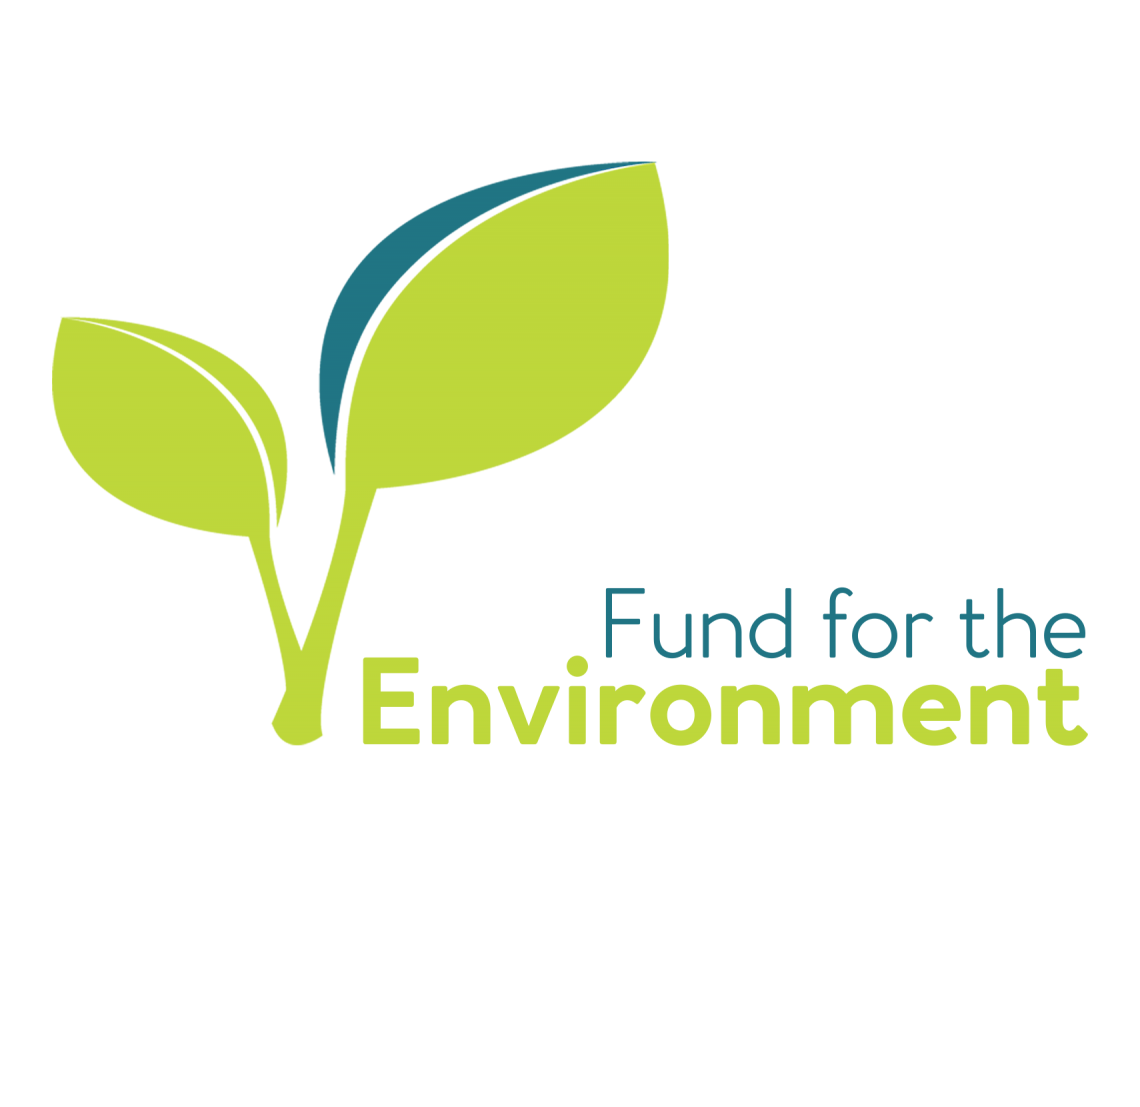 Fund for the Environment logo